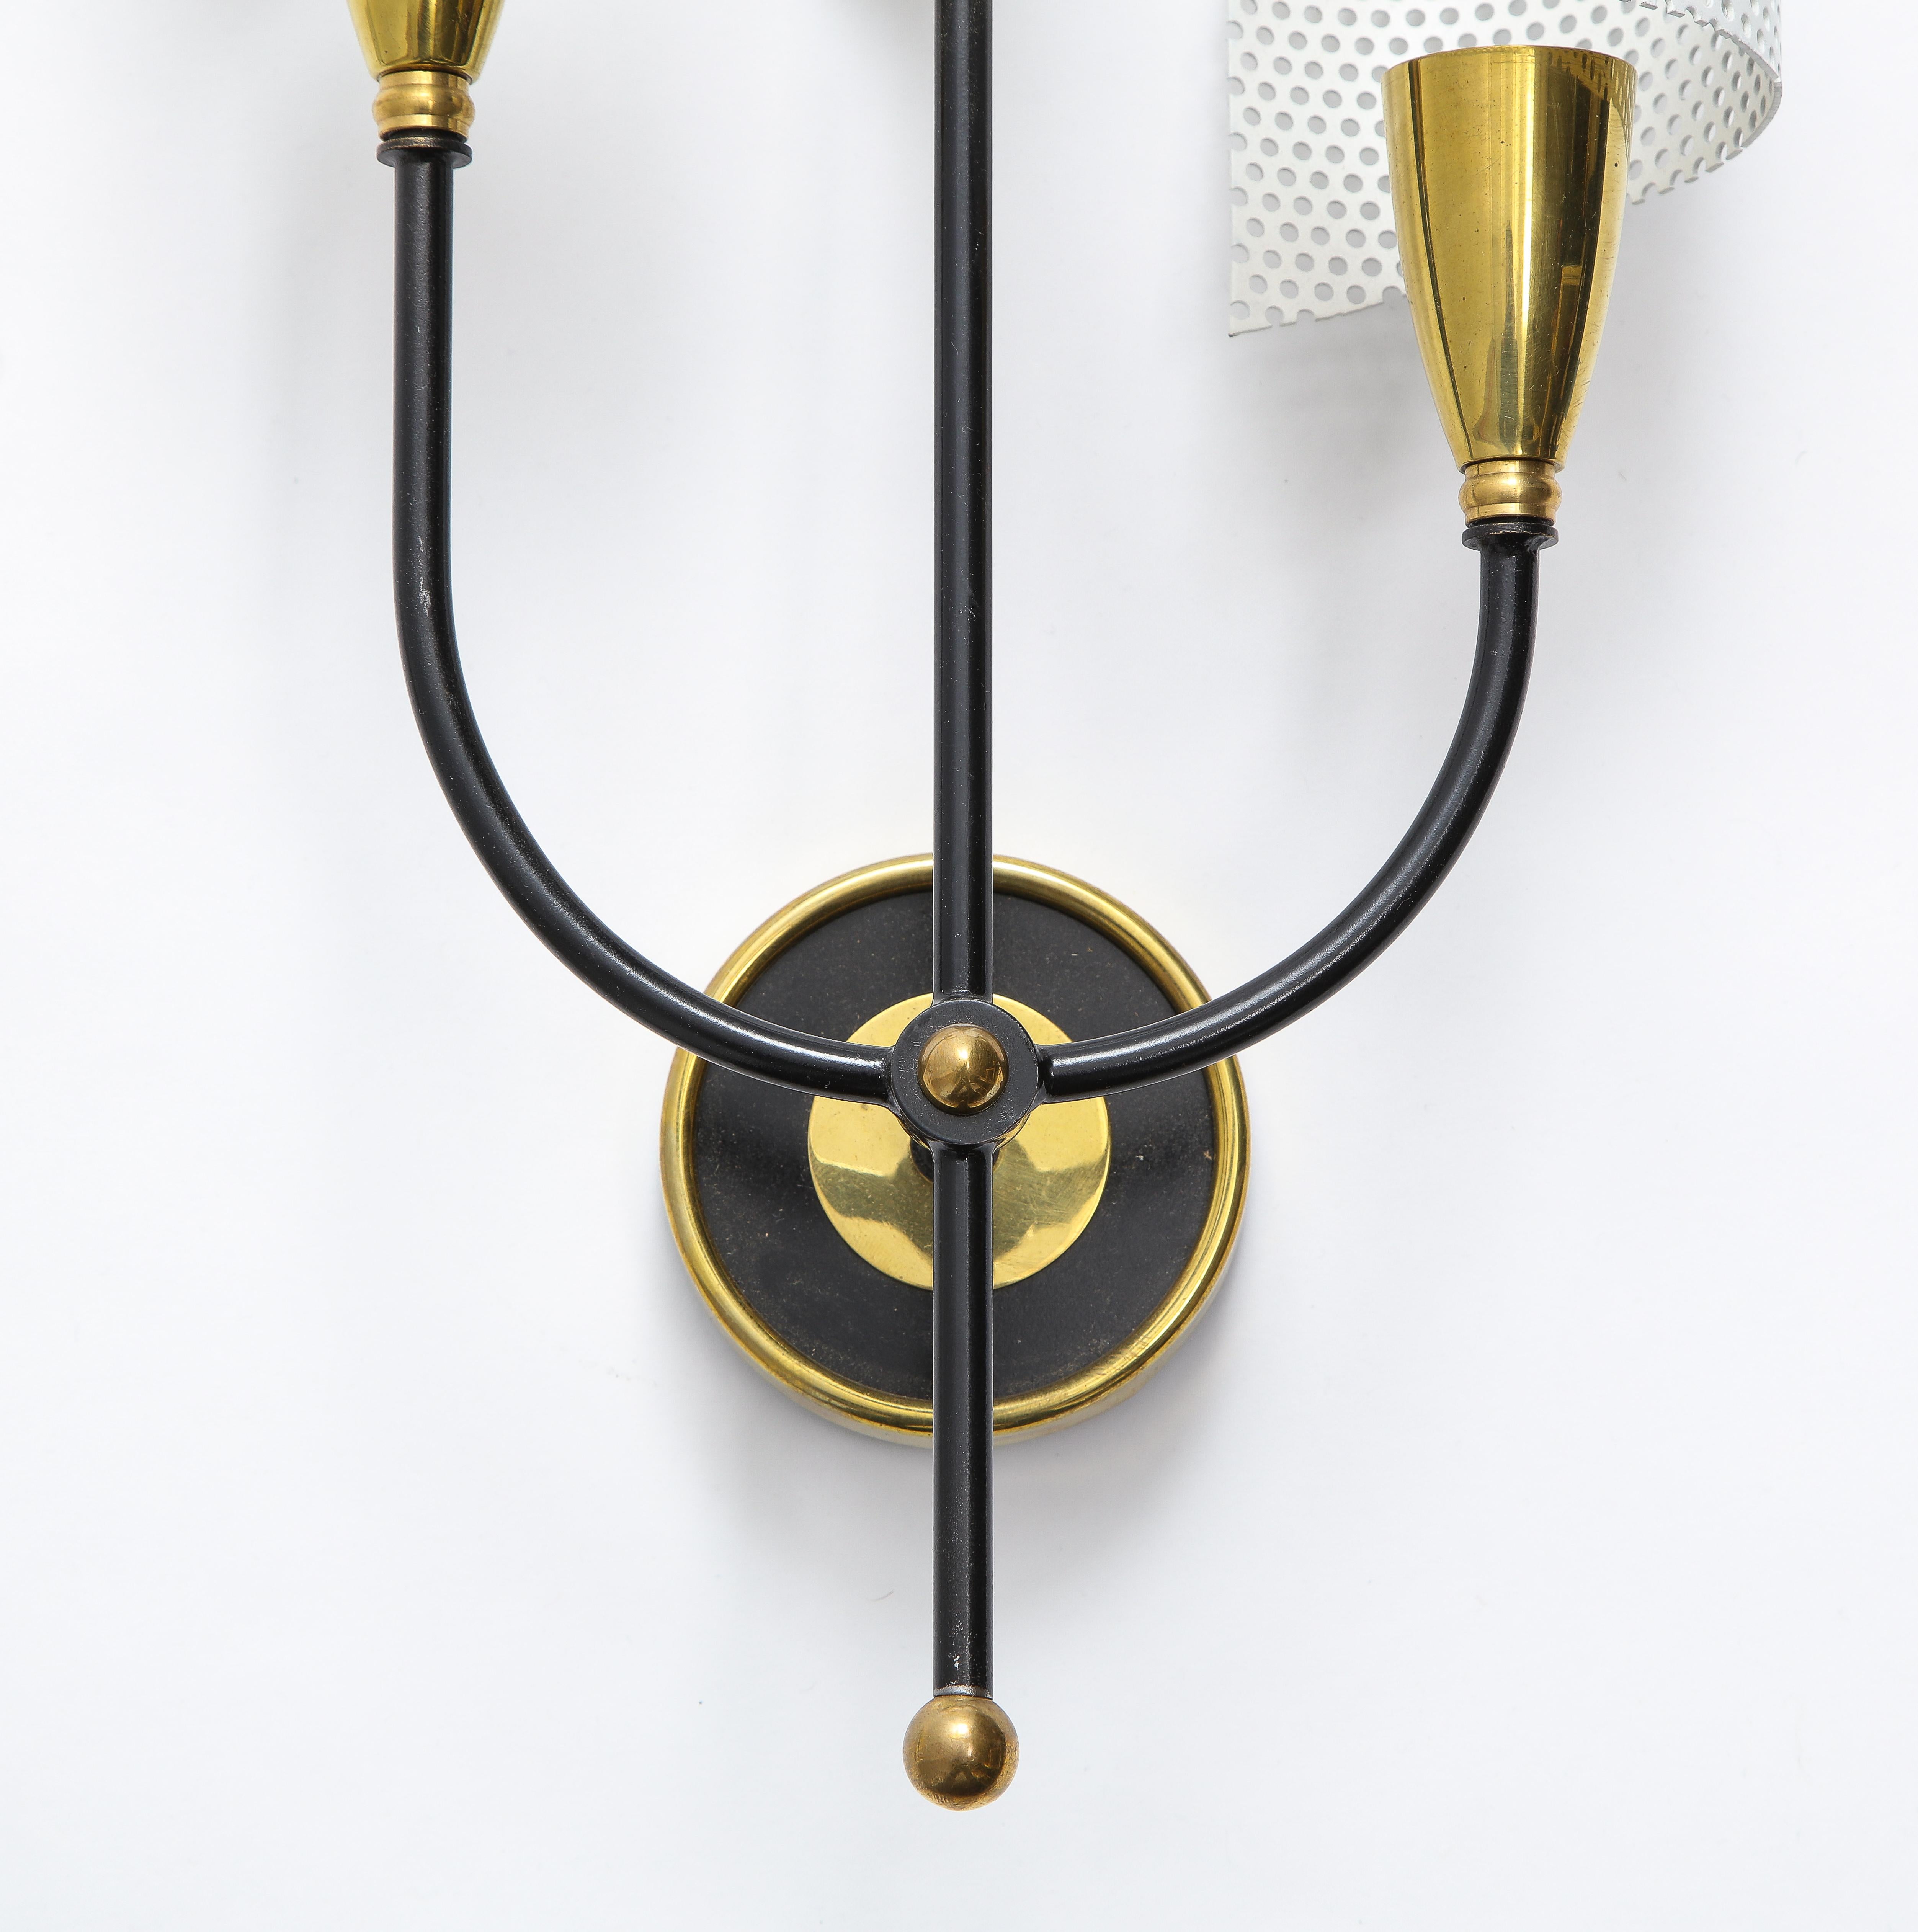 Pair of Scrolled Sconces in Brass and Aluminium by Mathieu, France, 1950s For Sale 3